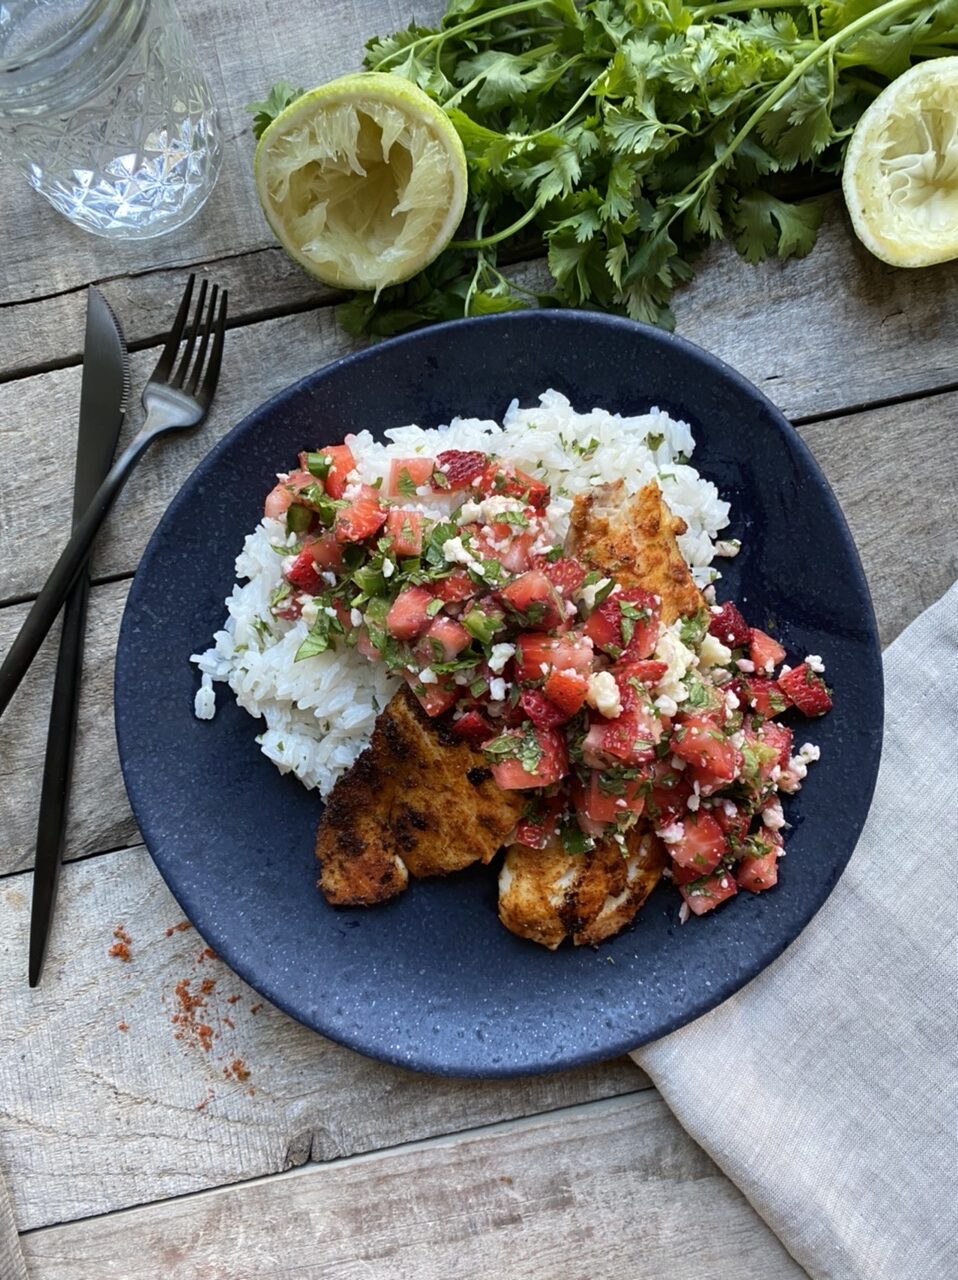 8B56D525 D65E 463E A684 BAA8DC3C7E10 e1623774800862 - Citrusy Pan-Seared Tilapia with Strawberry Salsa & Coconut Rice